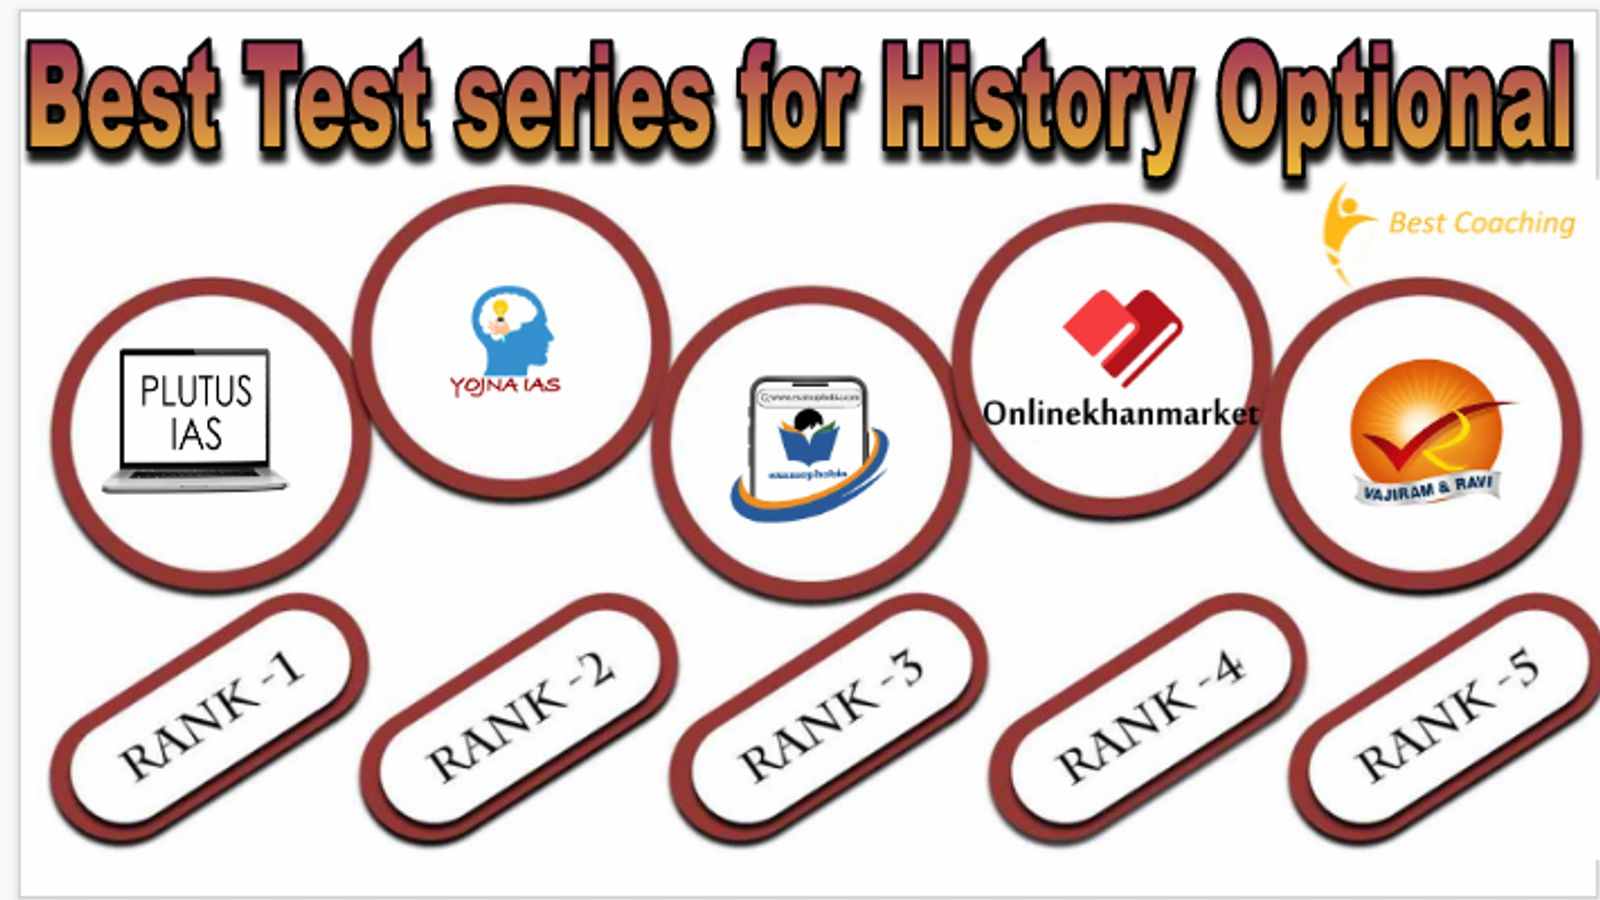 Best Test series for History Optional